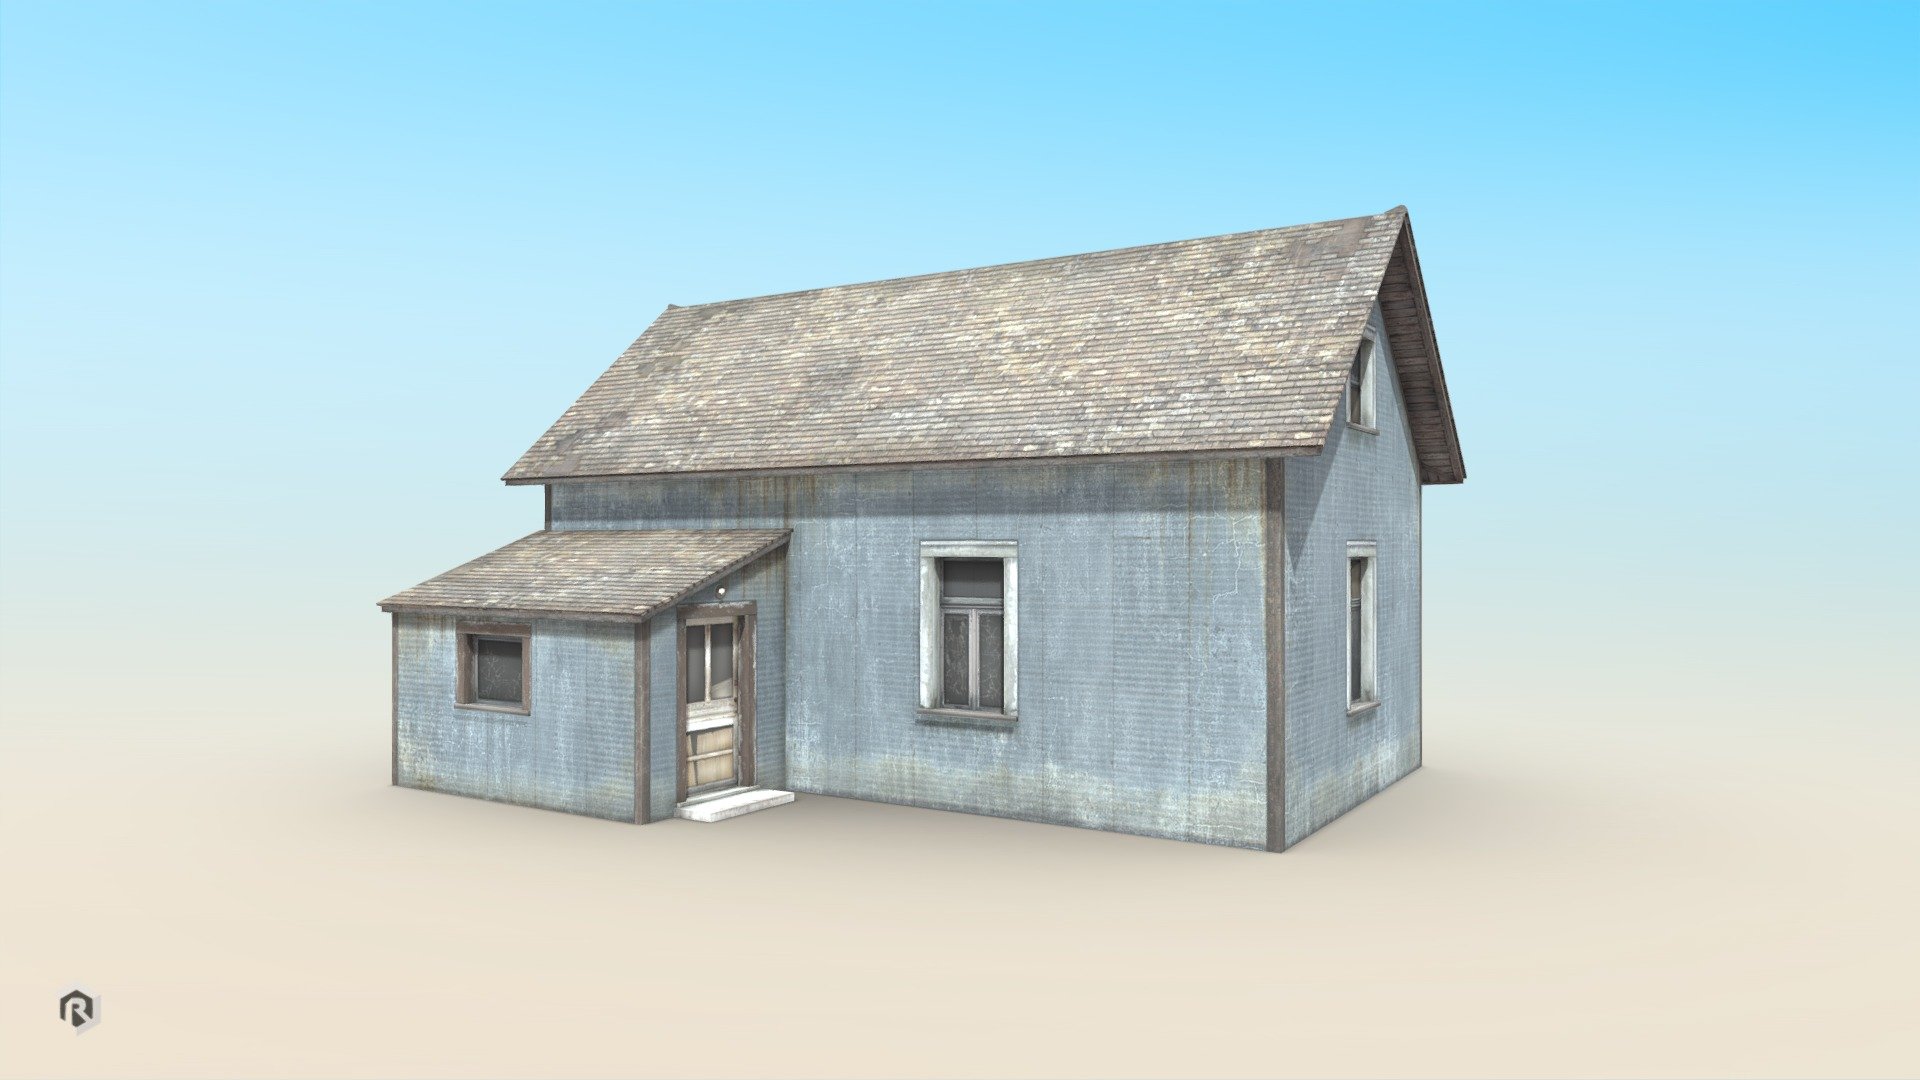 Low-poly 3D model of Old Wooden House.

It is best for use in games and other VR / AR, real-time applications such as Unity or Unreal Engine. 

It can also be rendered in Blender (ex Cycles) or Vray as the model is equipped with proper textures.   

You can also buy this model in a bundle: https://skfb.ly/owqyZ

Technical details:  




2048 Diffuse and AO texture set 

453 Triangles  

300 Vertices 

Model is one mesh   

Model completely unwrapped   

All nodes, materials and textures are appropriately named   

Lot of additional file formats included (Blender, Unity, Maya etc.)   

More file formats are available in additional zip file on product page.

Please feel free to contact me if you have any questions or need any support for this asset.

Support e-mail: support@rescue3d.com - Old Wooden House - Download Free 3D model by Rescue3D Assets (@rescue3d) 3d model